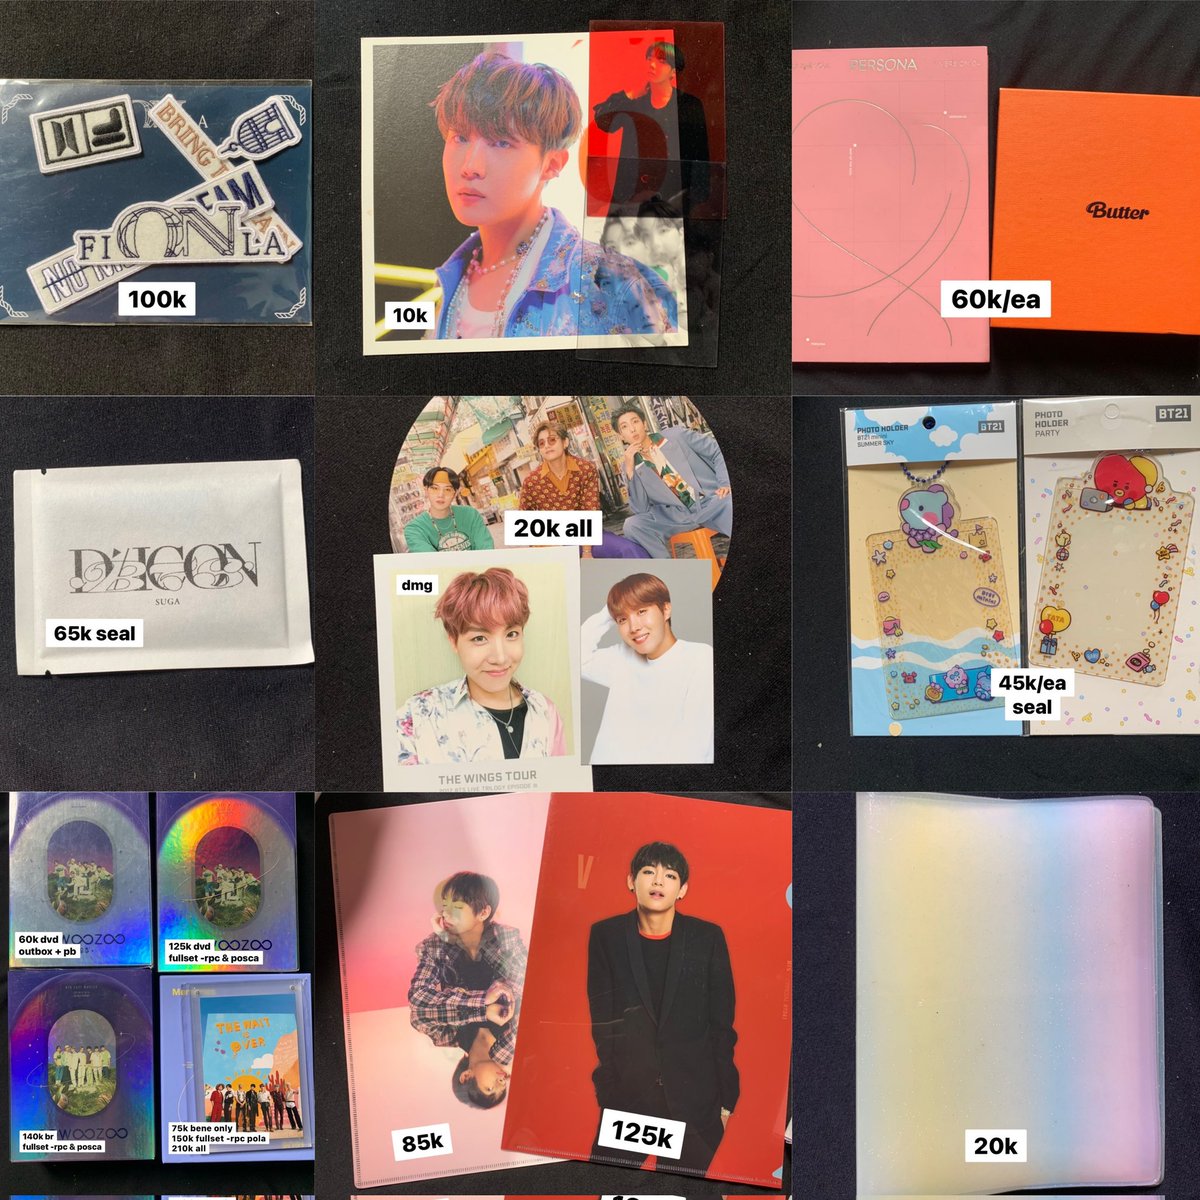 Wts / want to sale

[tolong like & rt🦋]

link condi : 
drive.google.com/drive/folders/…

Paypal ✅
Ina adress only✅
Nego ✅

TnC di tweet

t. wings epilogue 17520 22920 mpc lys mots one sys dicon tae zoom persona butter pc bts memo nmd wcb sowoozo festa blu-ray fm ld photocard mpc